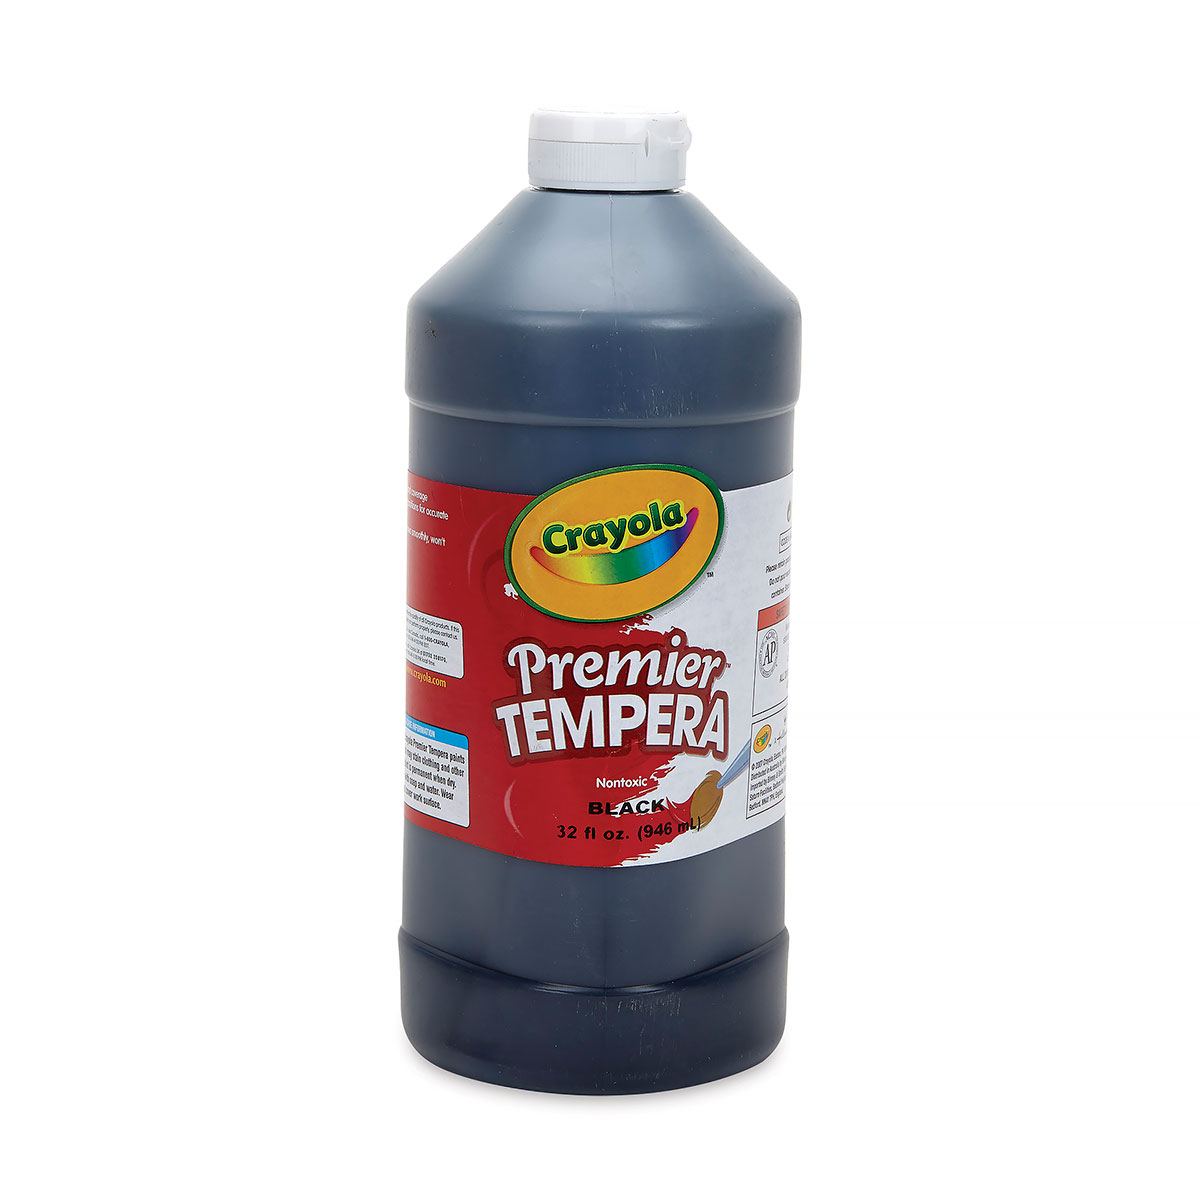 Crayola Premier Tempera Paint For Kids - Black (16oz), Kids Classroom  Supplies, Great For Arts & Crafts, Non Toxic, Easy Squeeze Bottle